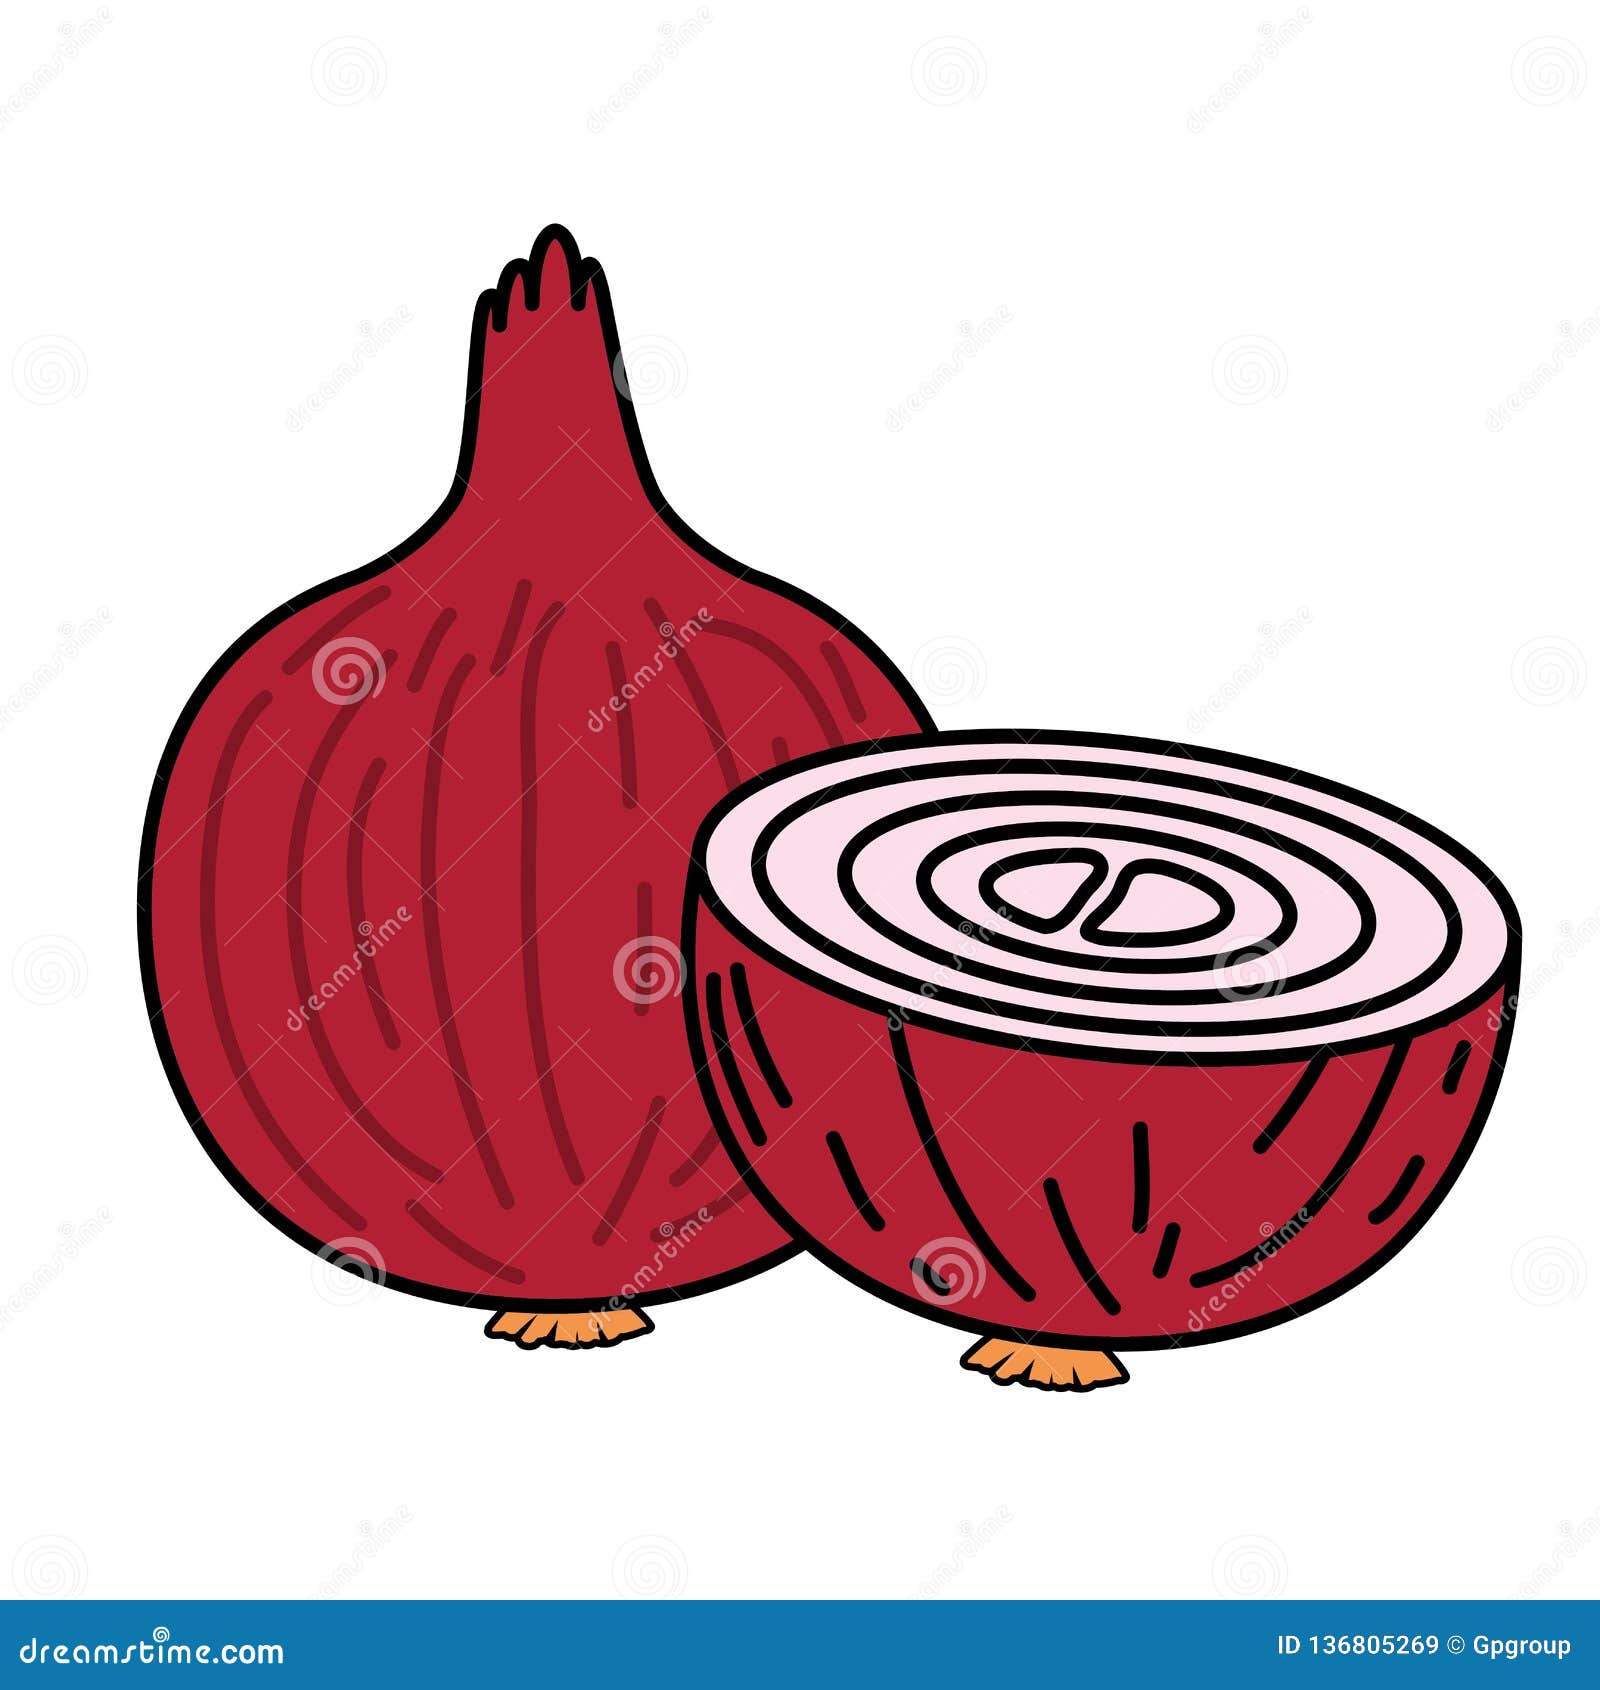 How to draw an onion - YouTube